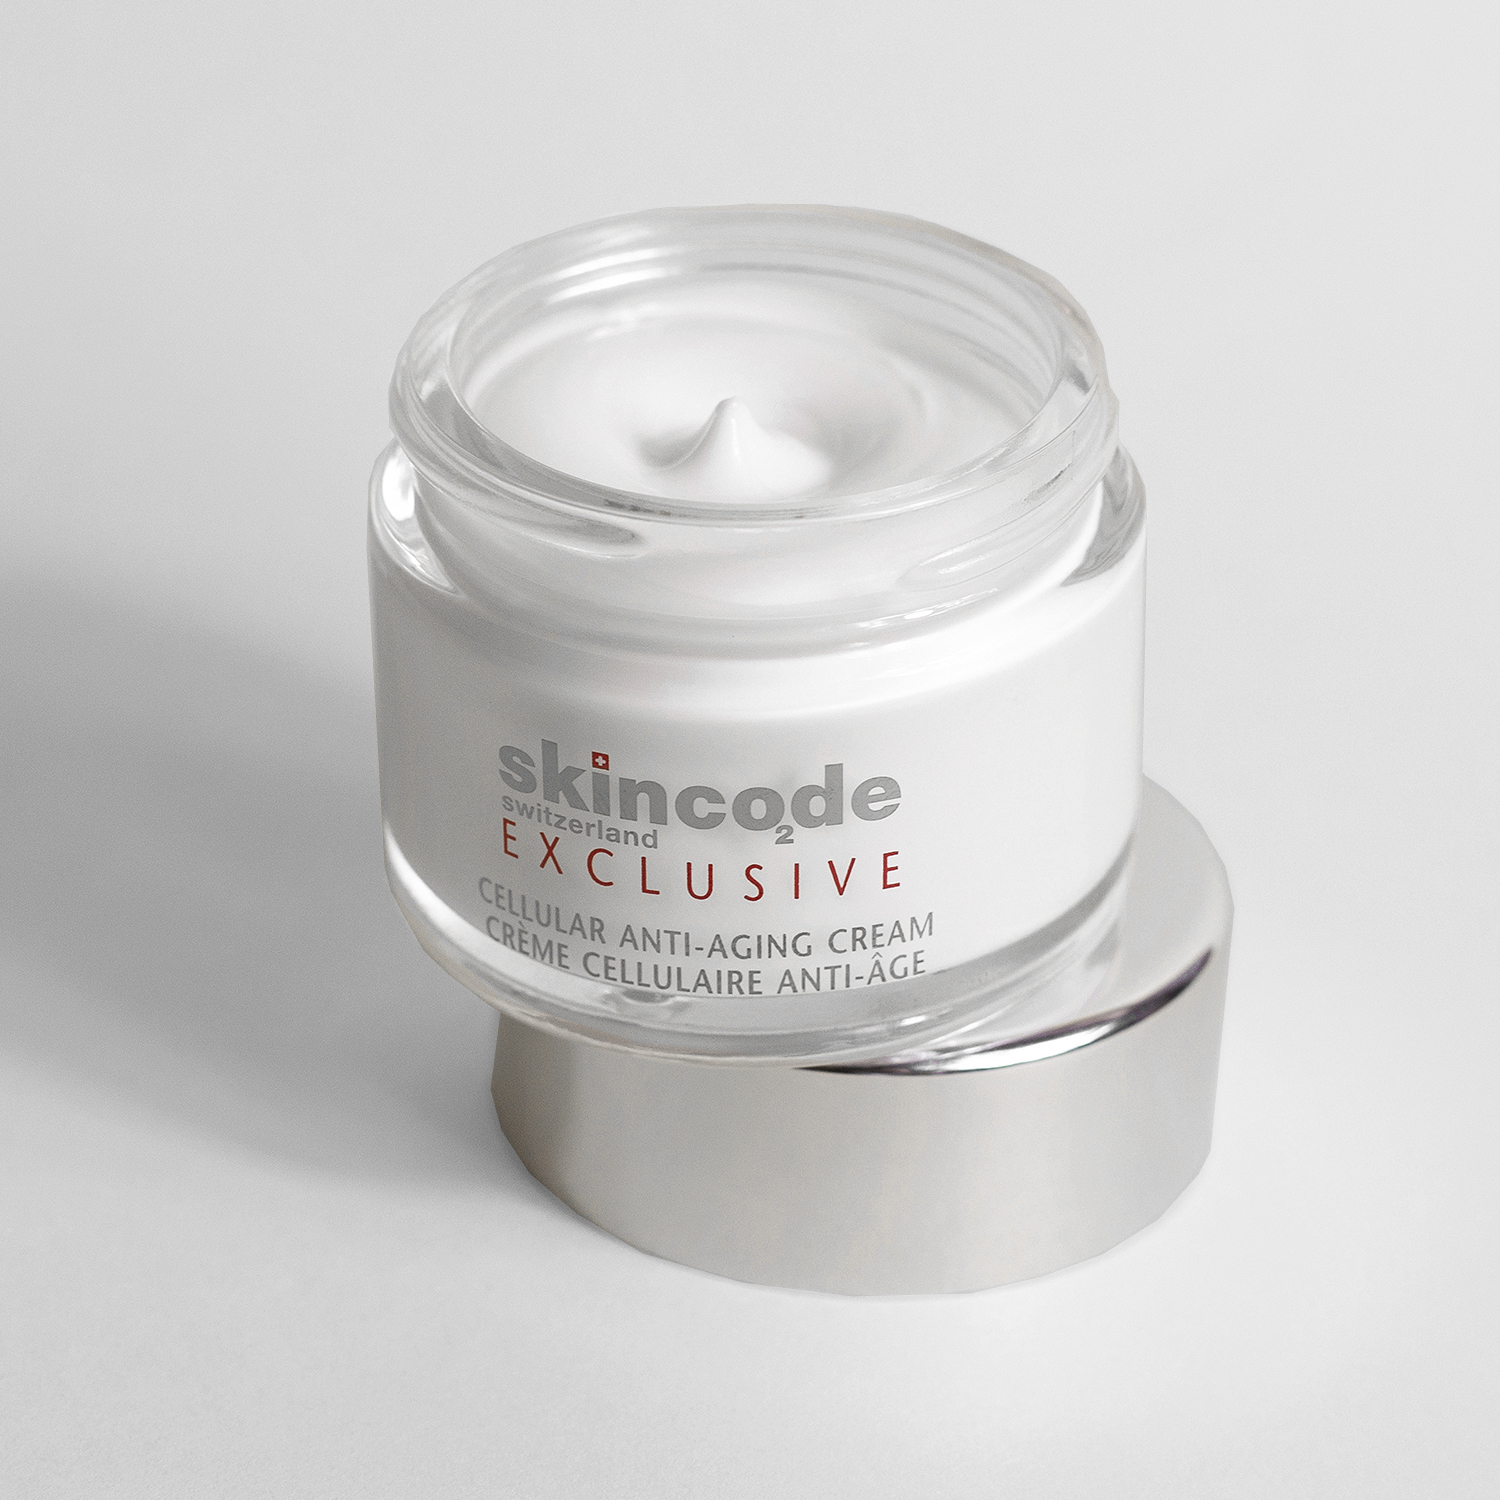 skincode cellular anti-aging cream review)